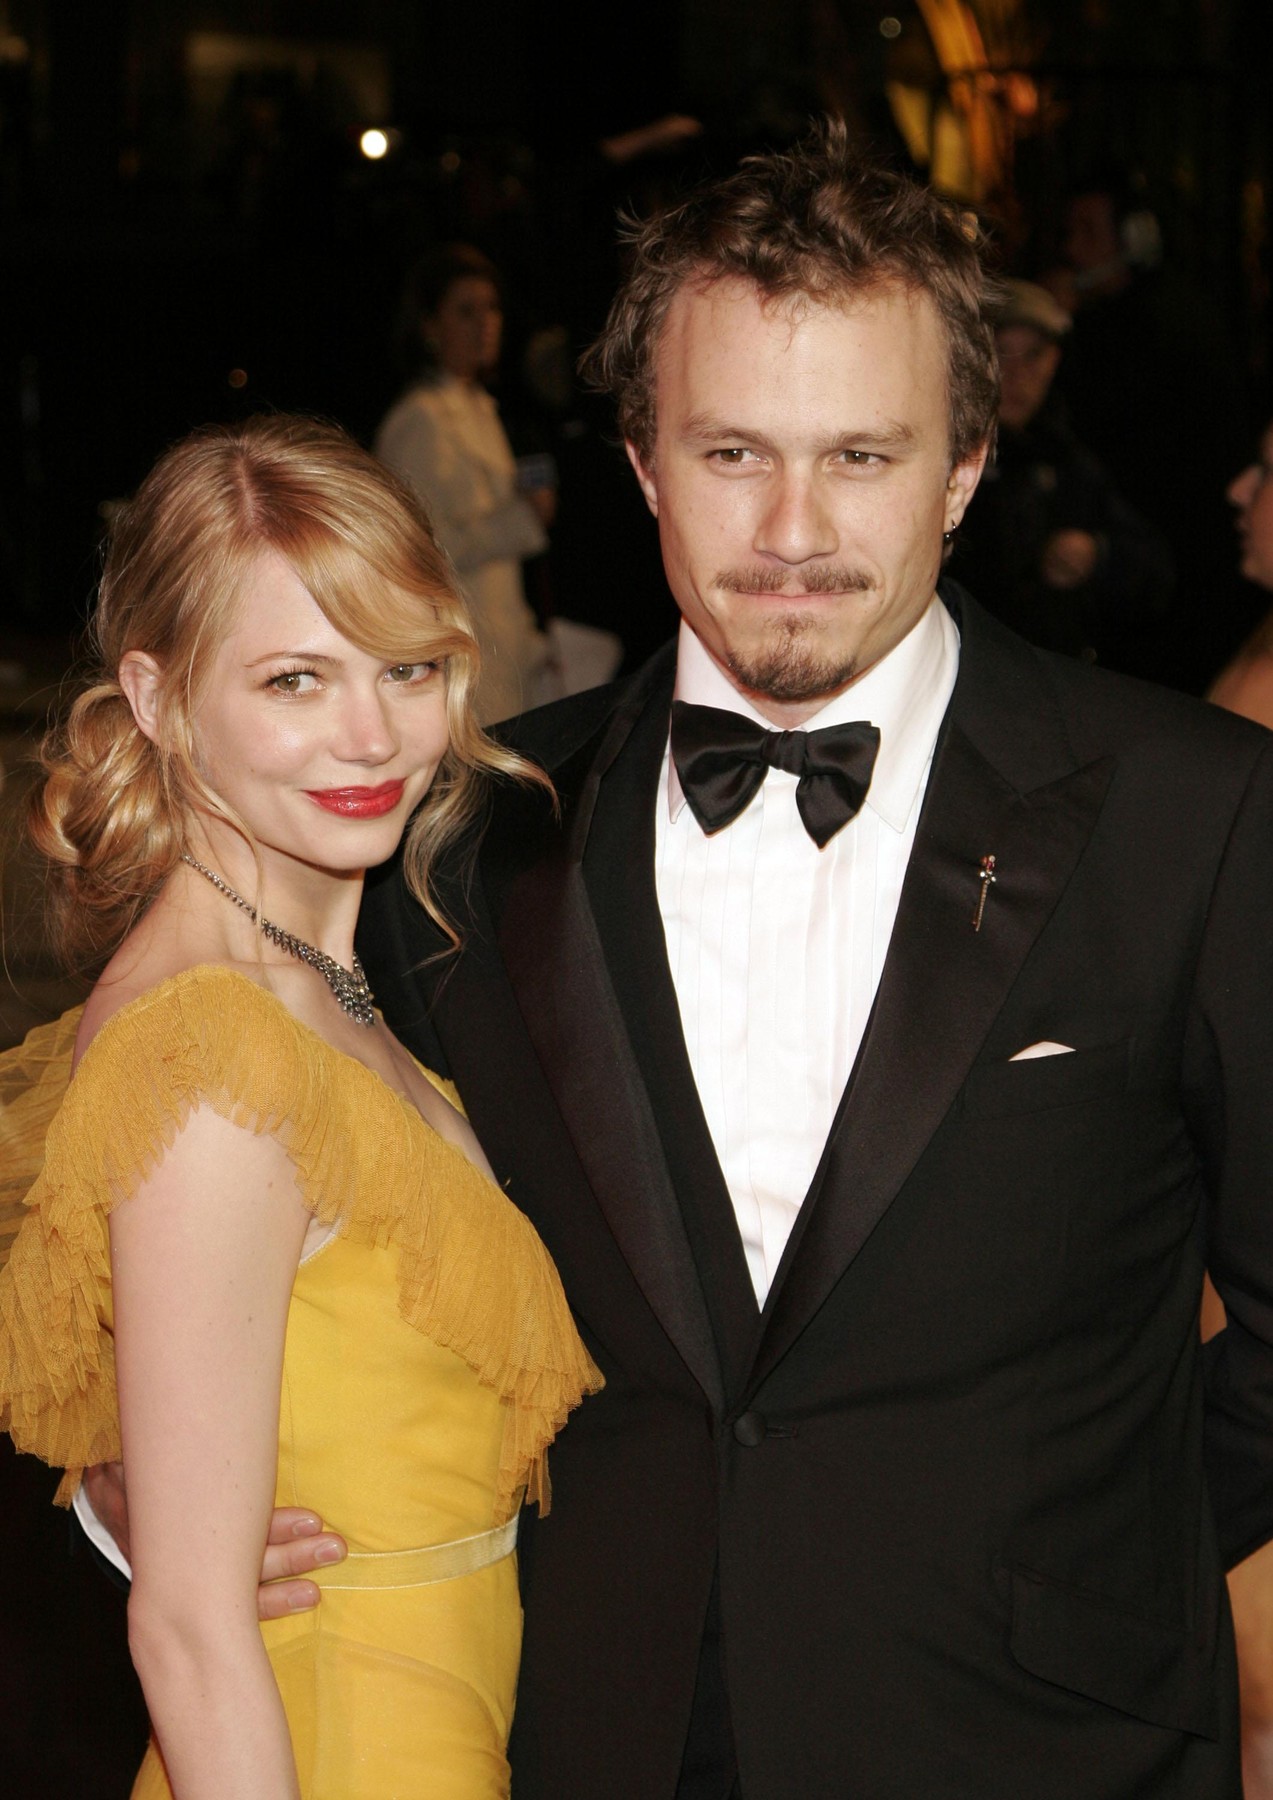 Michelle Williams (wearing Vera Wang), Heath Ledger at arrivals for Vanity Fair Oscar Party, Mortons Restaurant in West Hollywood, Los Angeles, CA, Sunday, March 05, 2006.,Image: 96915525, License: Rights-managed, Restrictions: For usage credit please use; Jeff Smith/Everett Collection, Model Release: no, Credit line: Jeff Smith / Everett / Profimedia